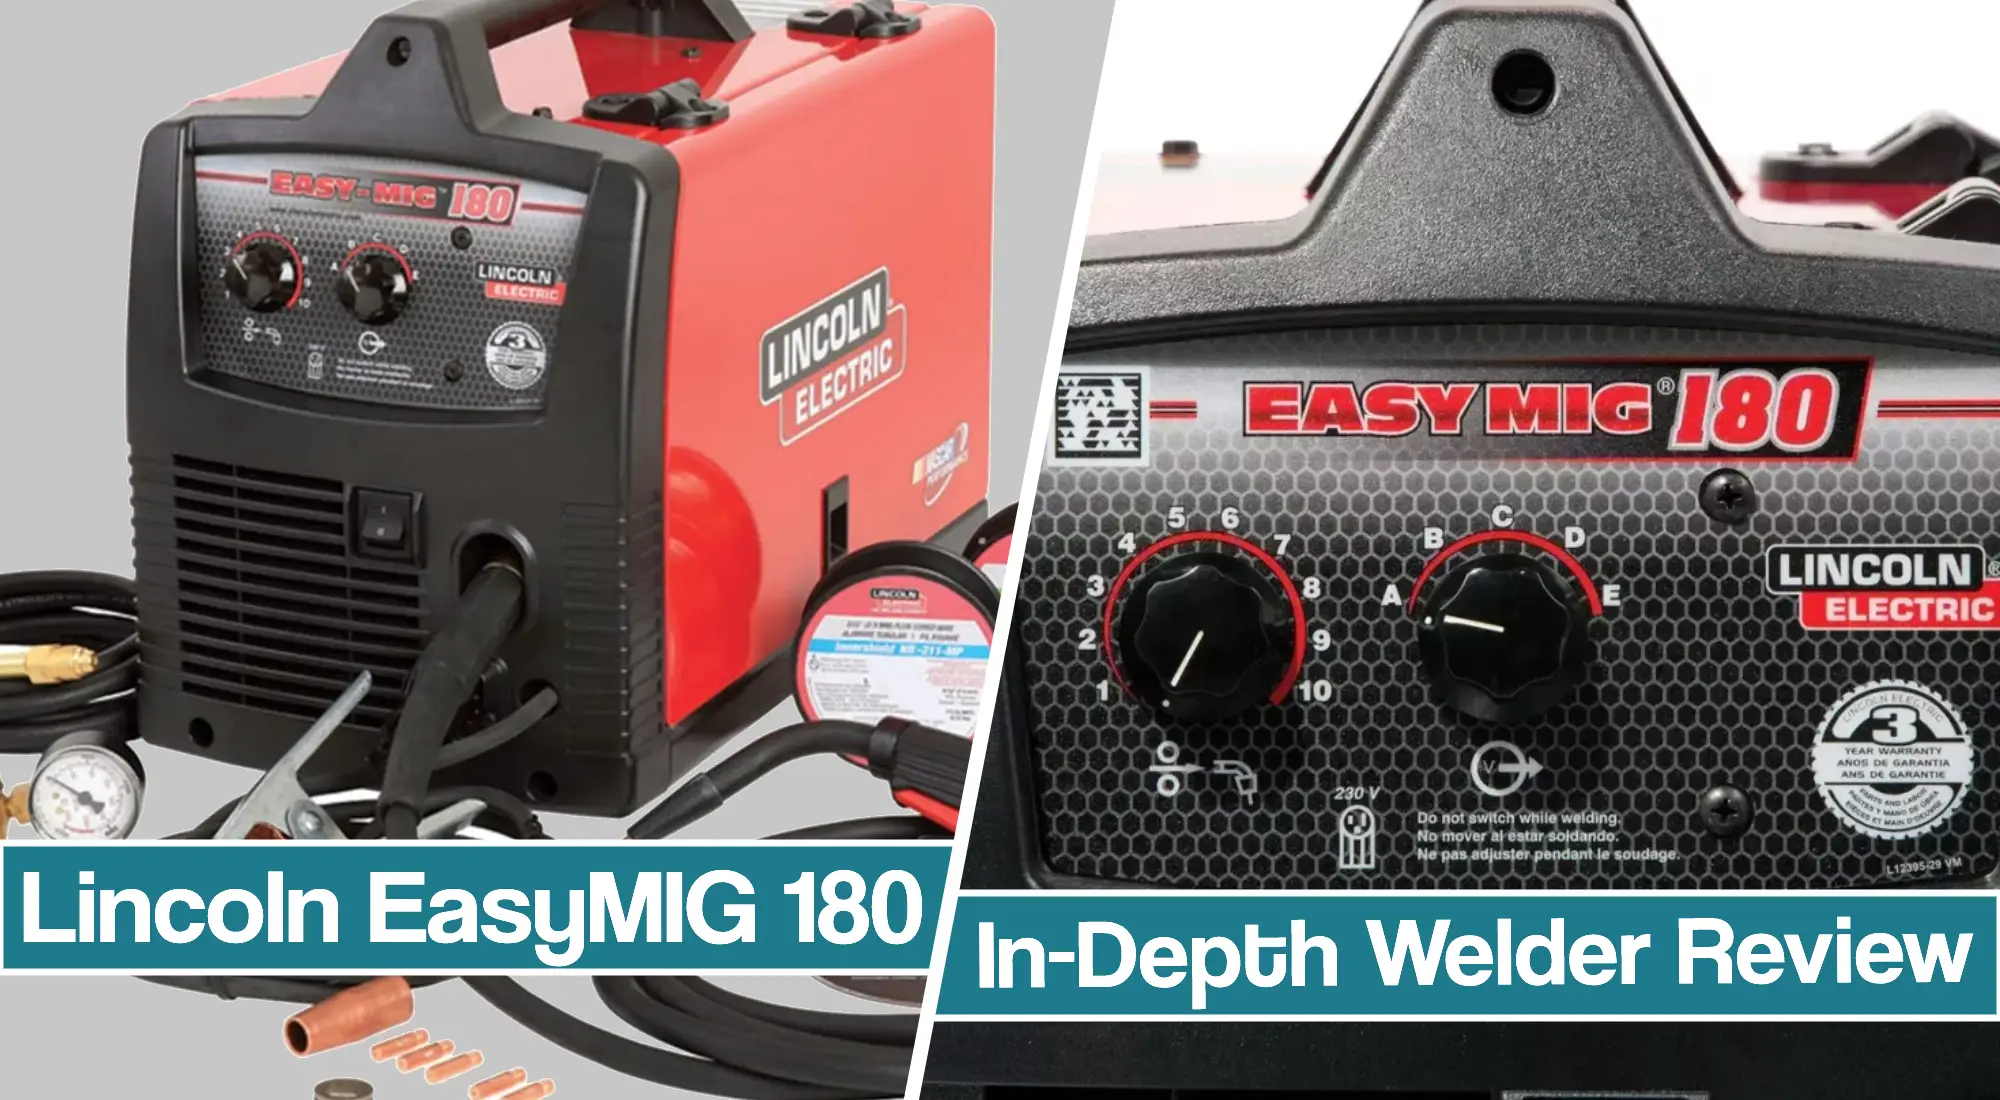 Lincoln EasyMIG 180 Review – Detailed Overview of Brand-Name Entry-Level Welder